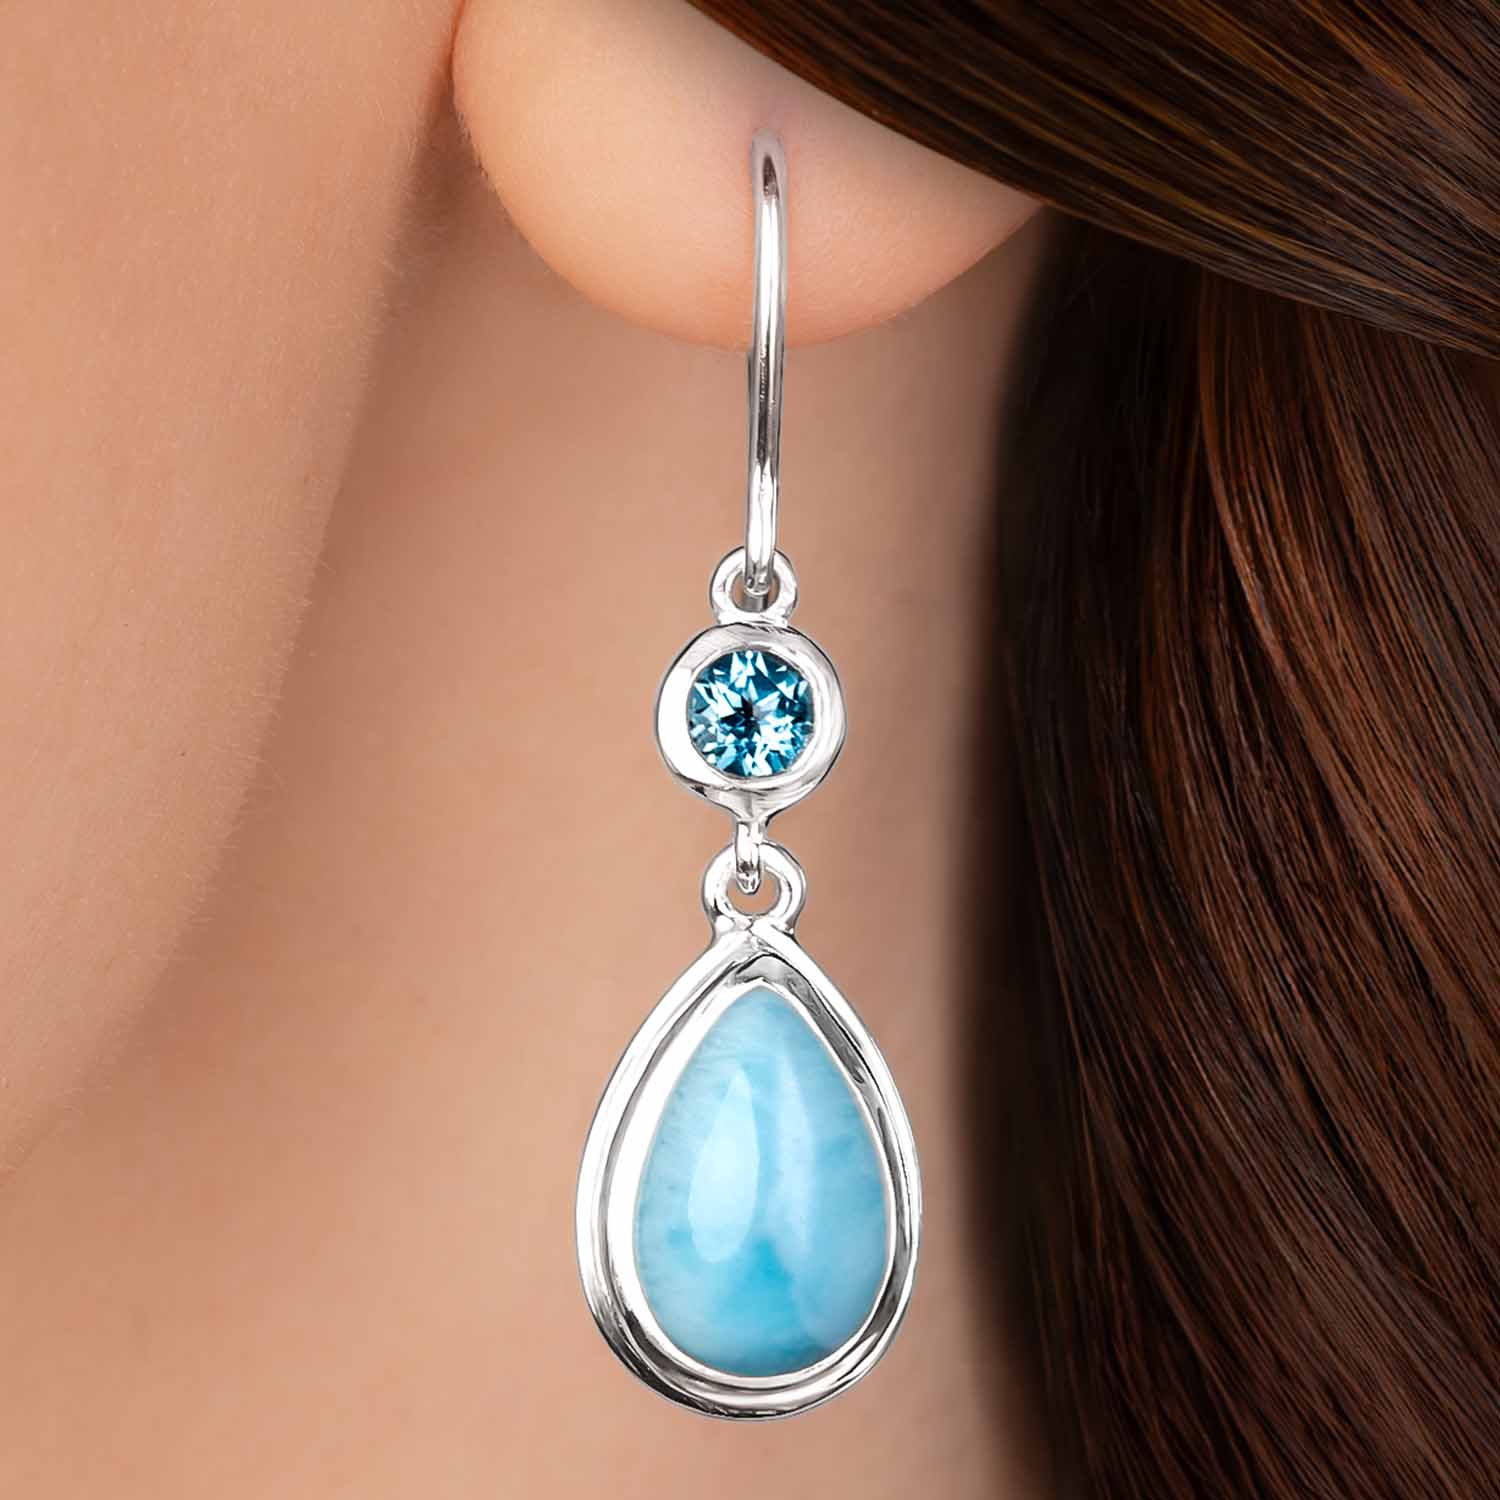 Blue topaz Earrings in Silver with larimar by marahlago